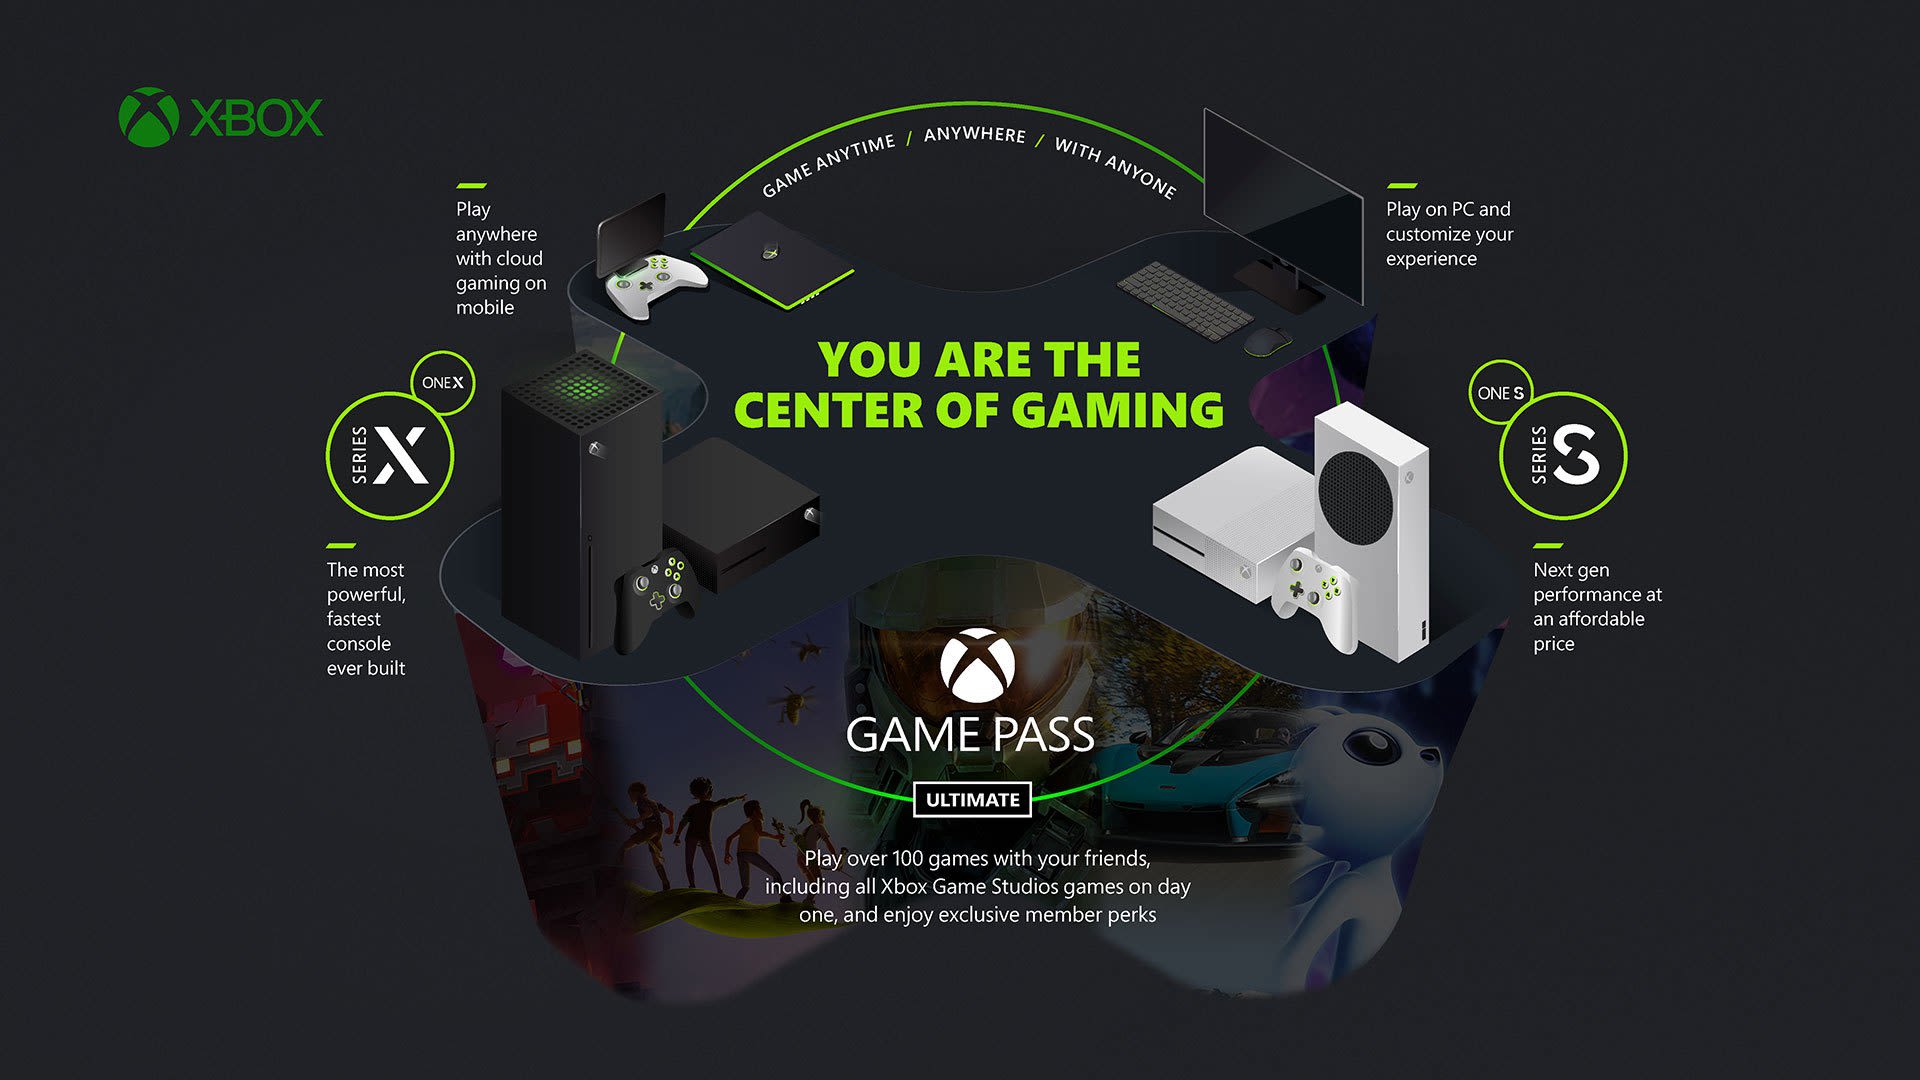 How to set Up Xbox Game Pass for PC